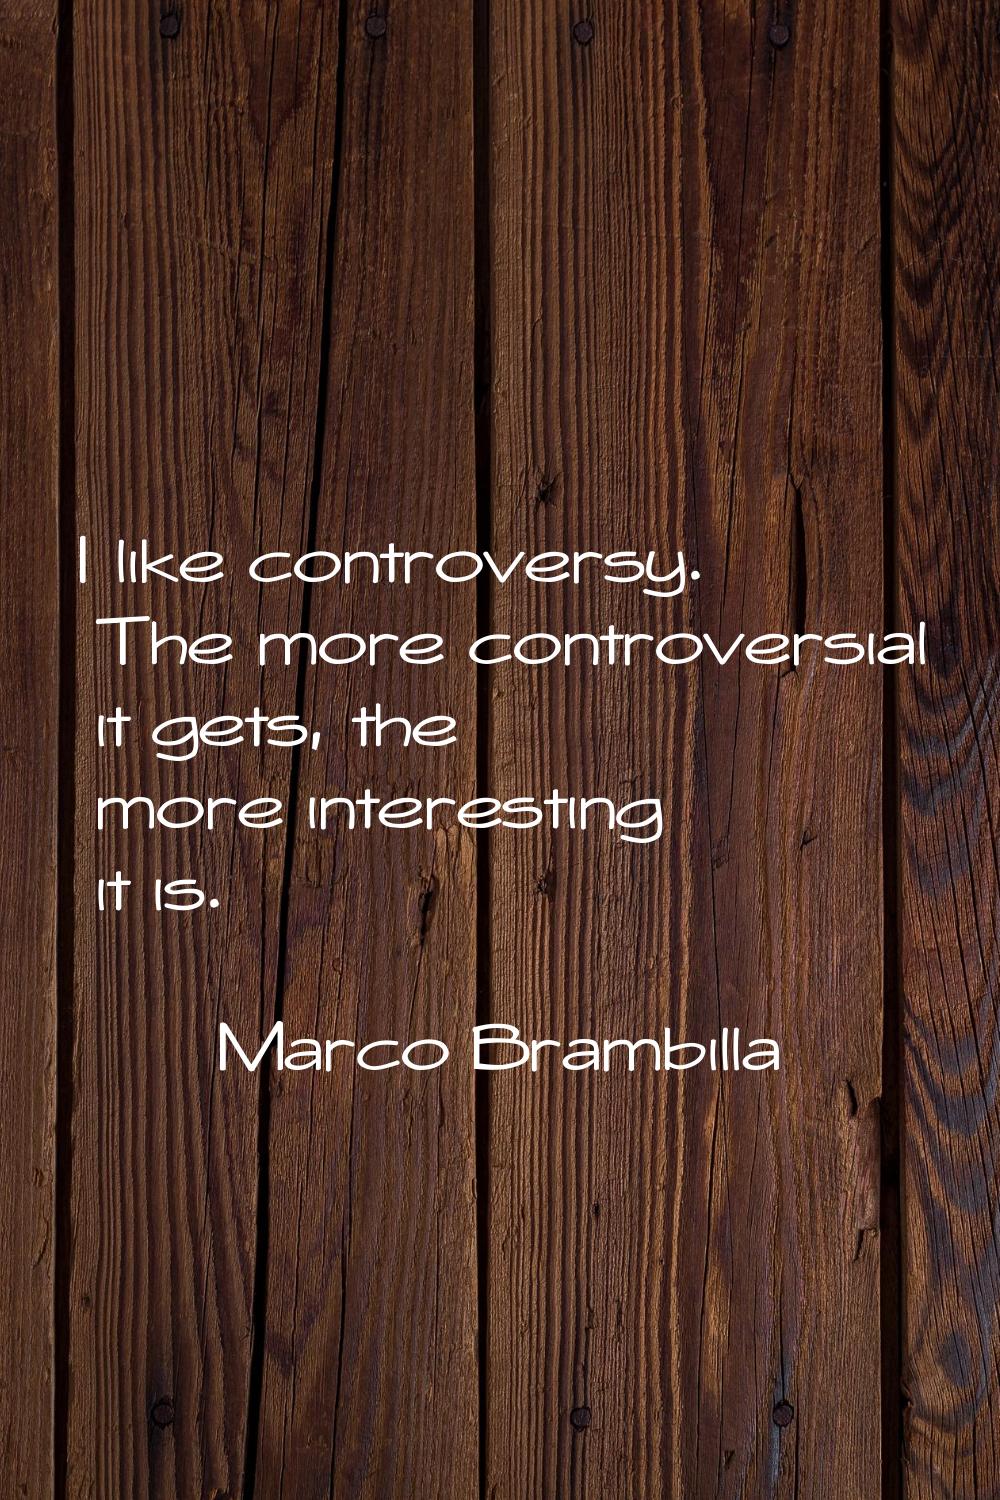 I like controversy. The more controversial it gets, the more interesting it is.